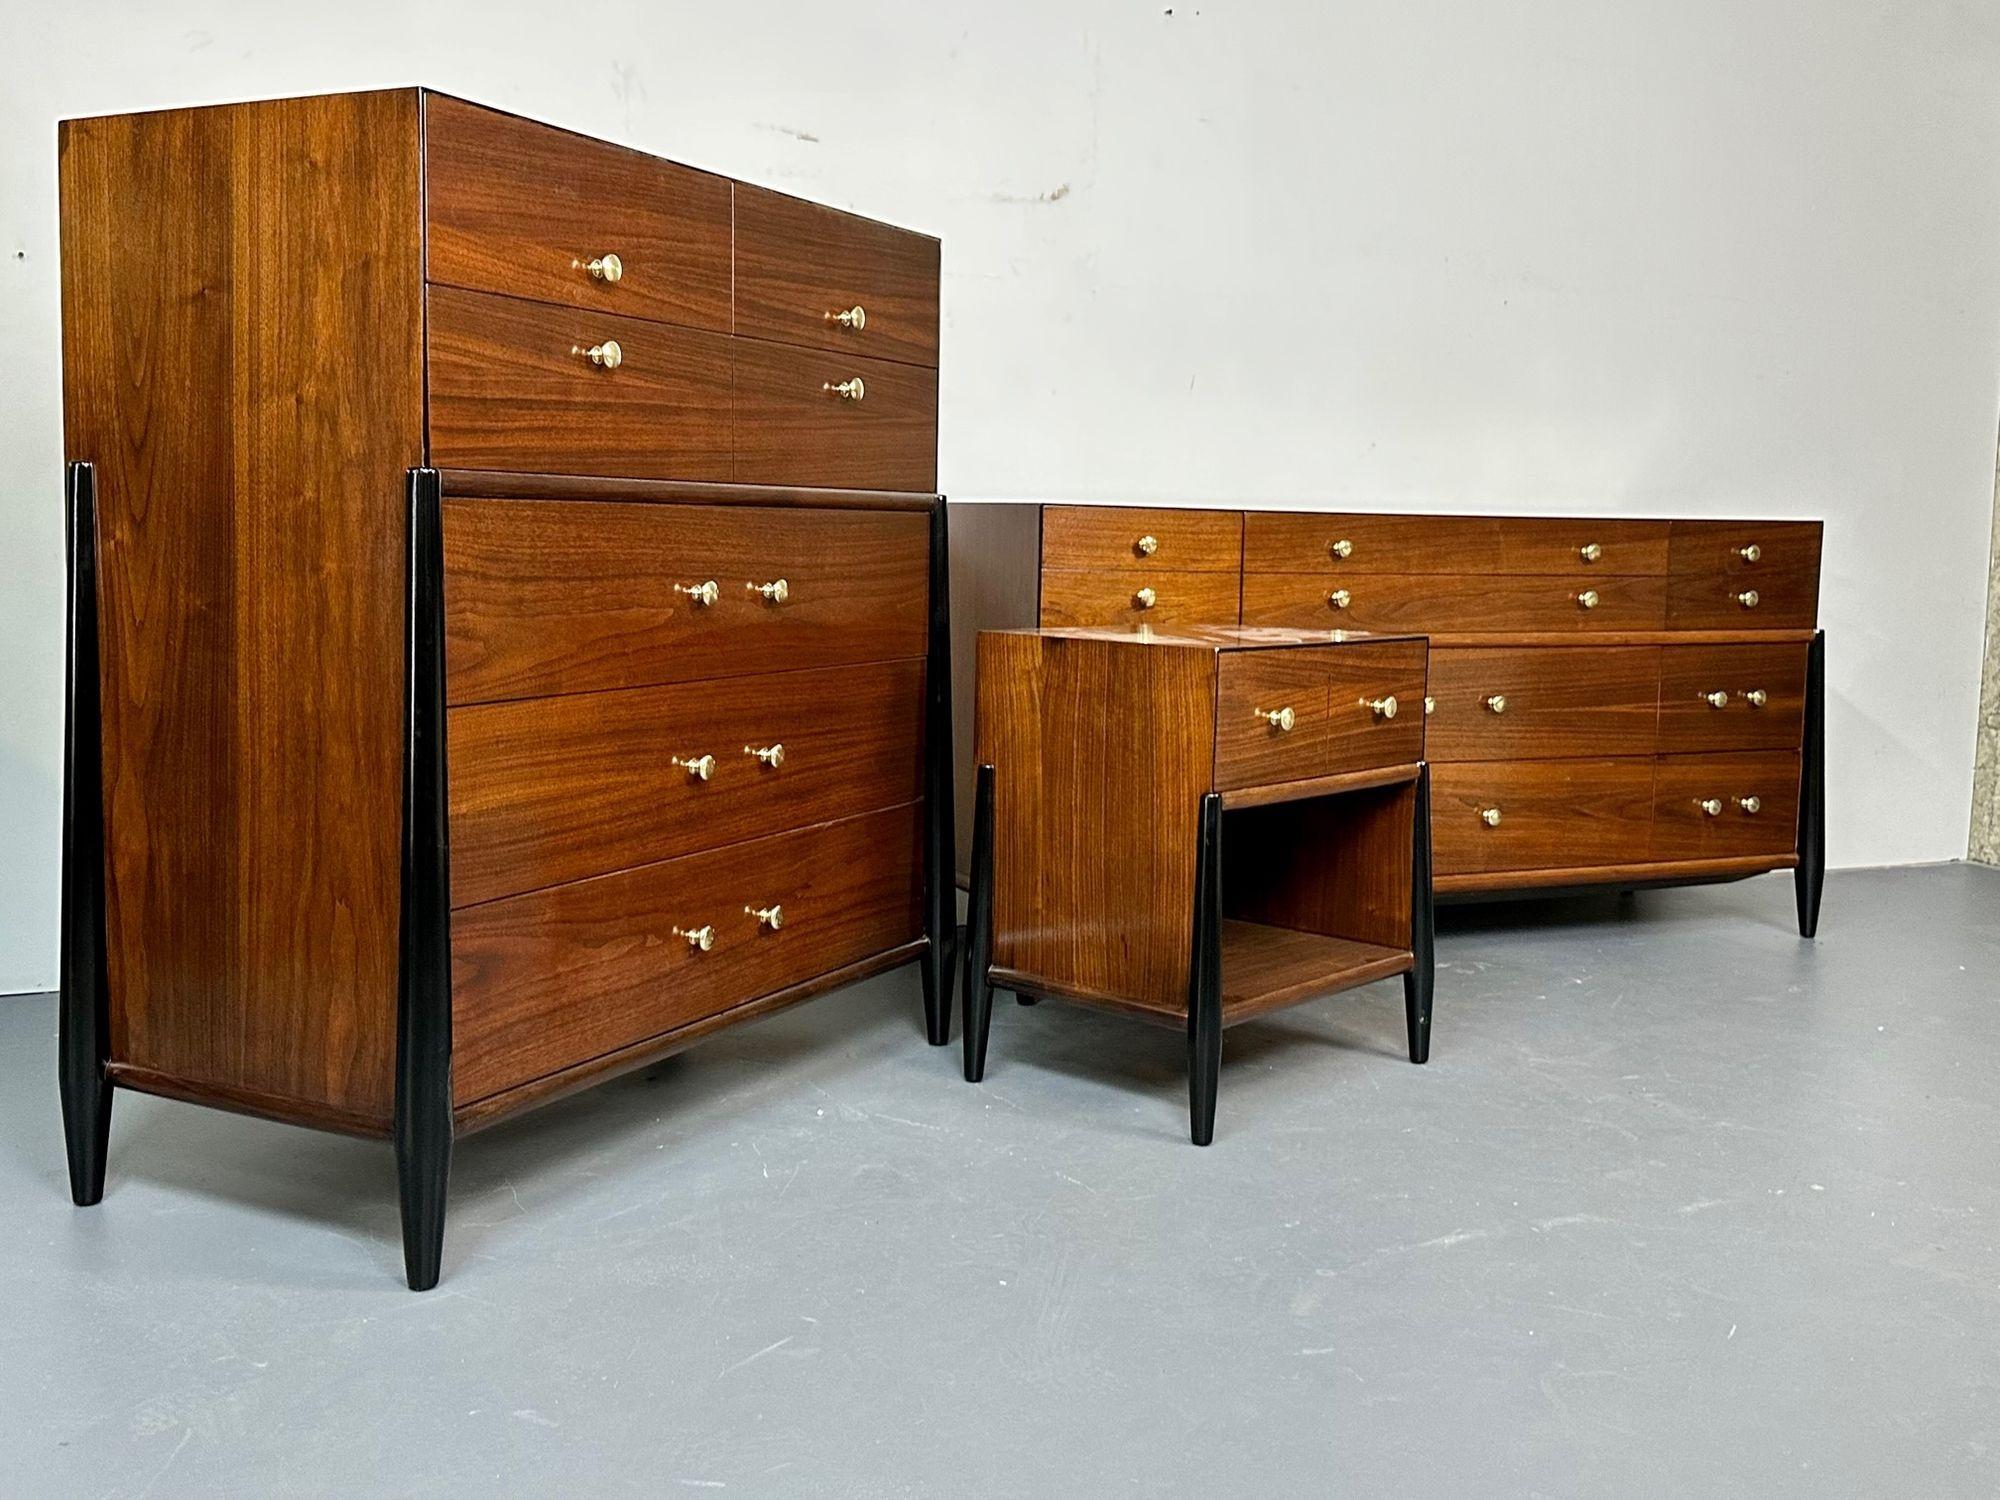 Mid Century Modern Bedroom Set, Dresser, Chest, Nightstand, West Michigan Furniture Co. 
Bedroom set comprised of a chest, dresser and nightstand. All pieces are built with a fine grained walnut that has been fully refinished with ebonized columns